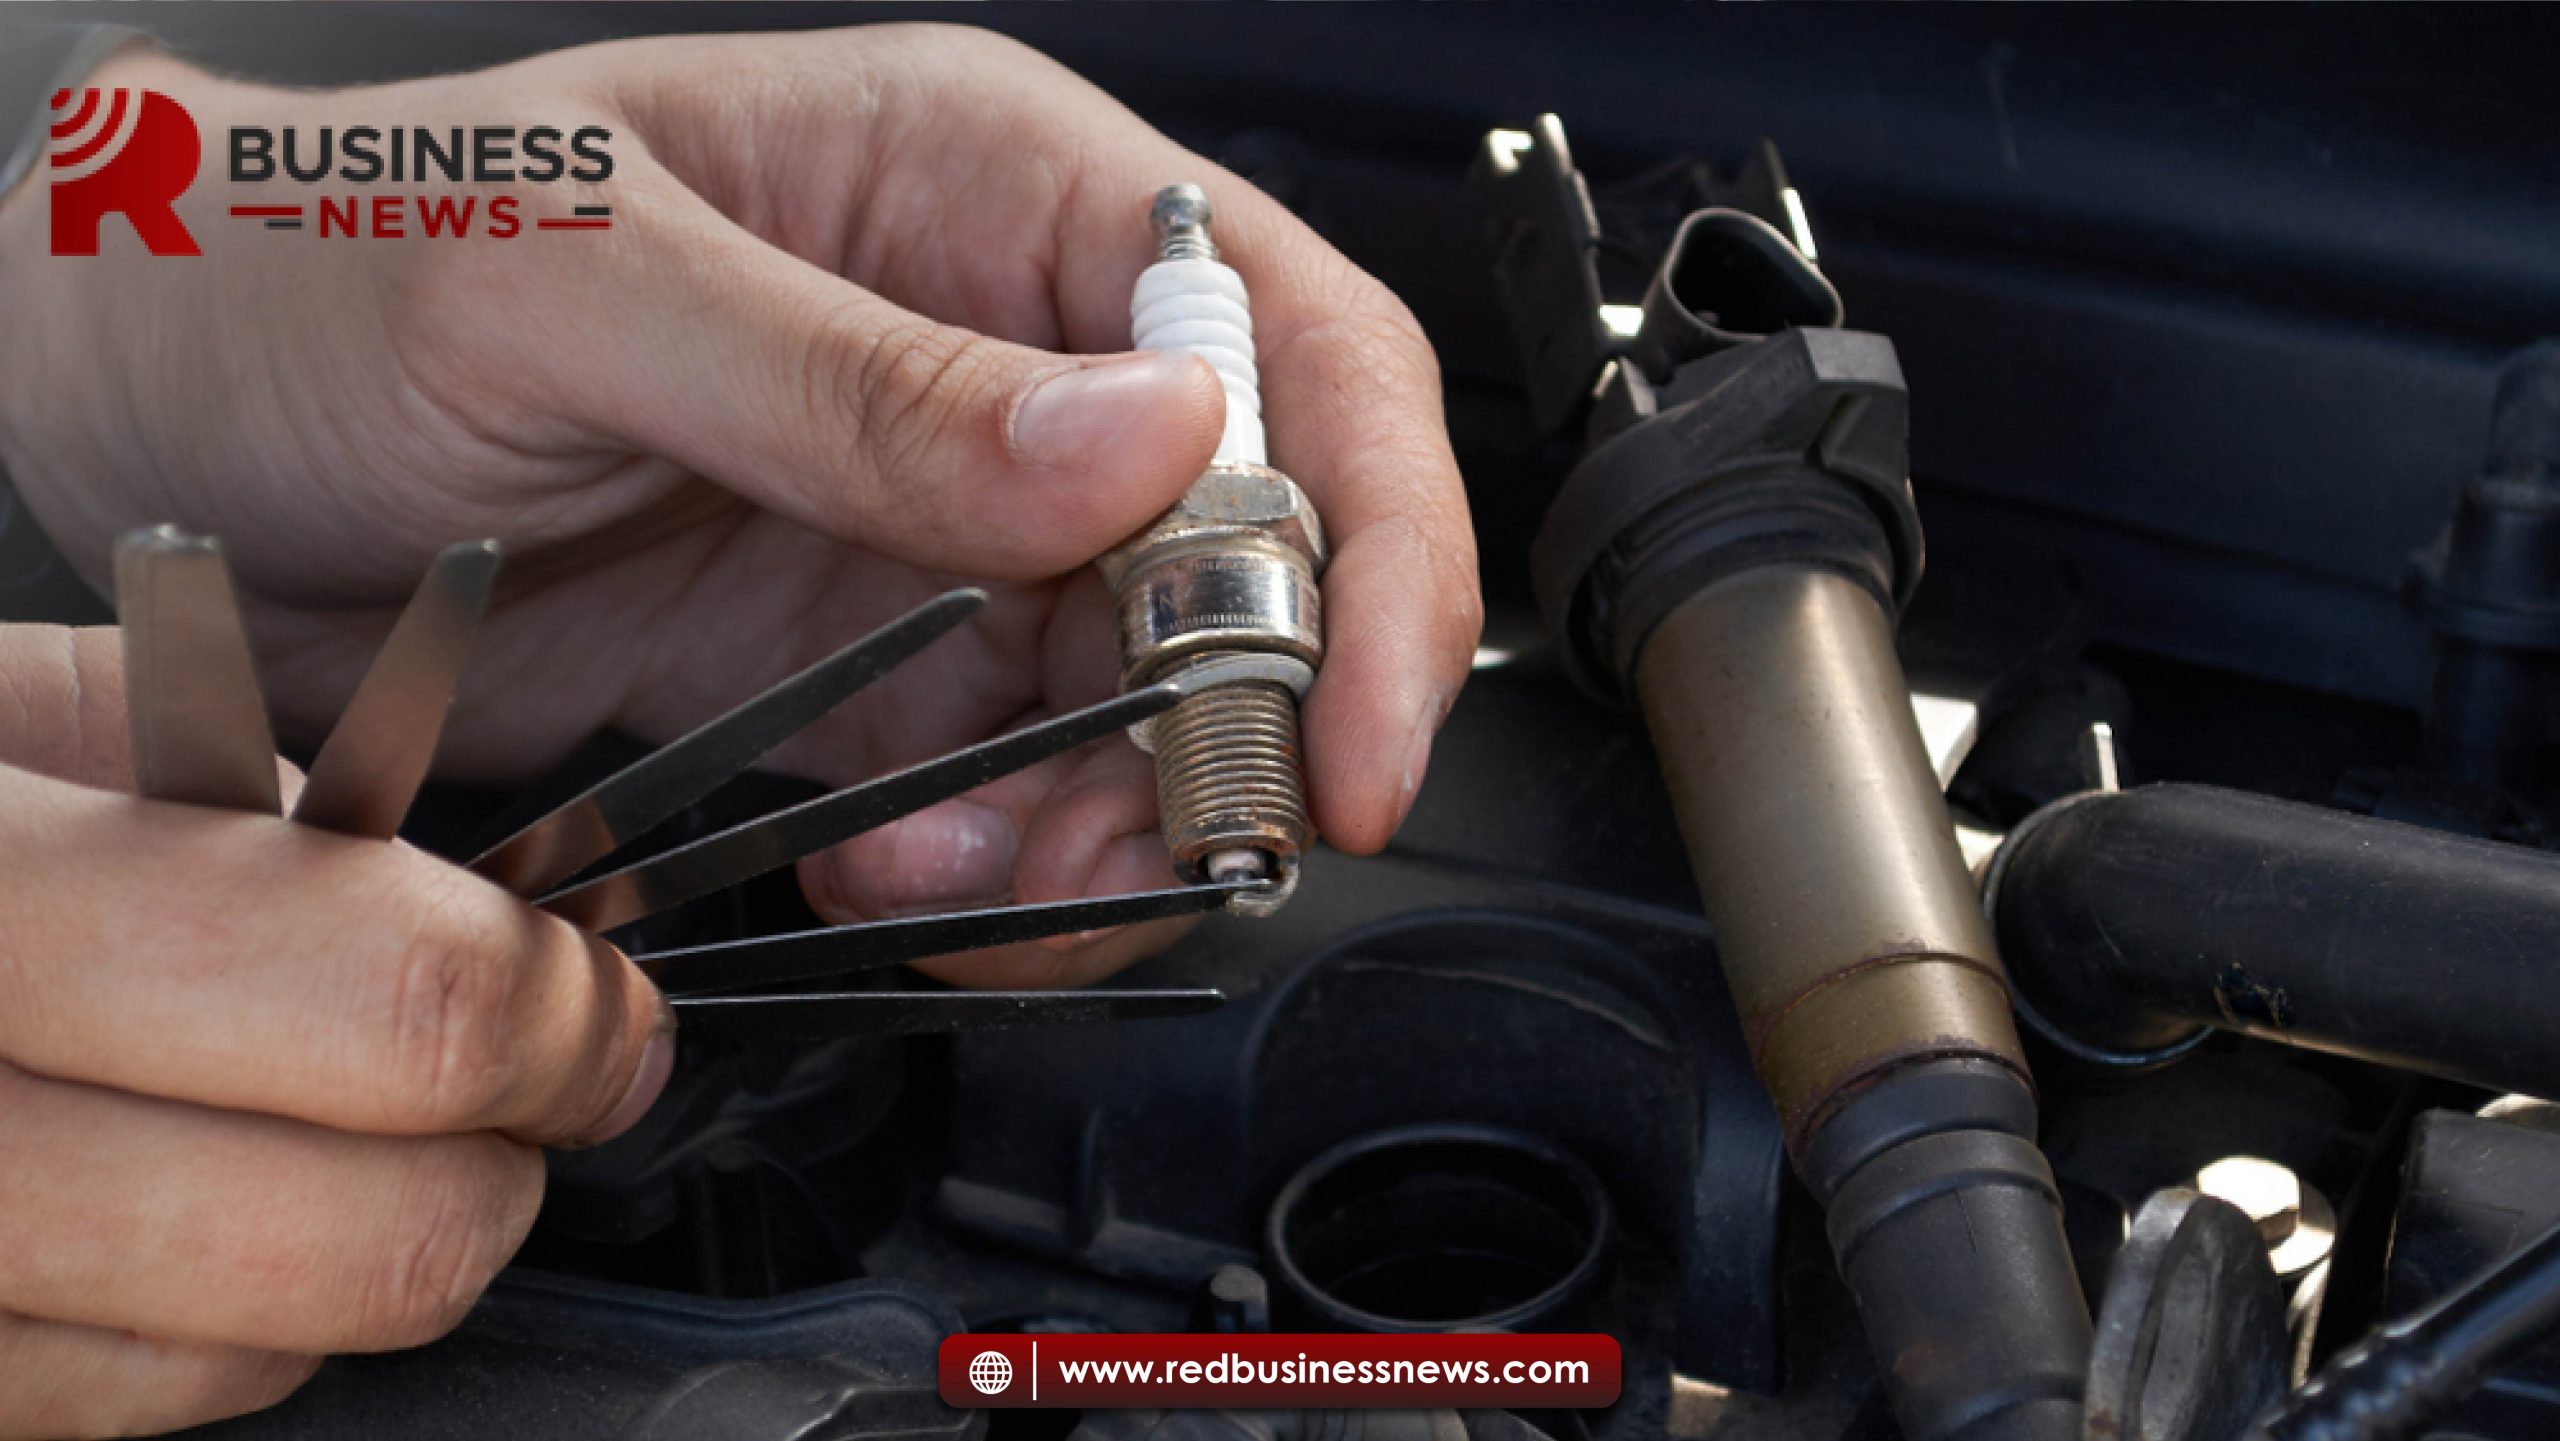 How to Gap Spark Plugs?